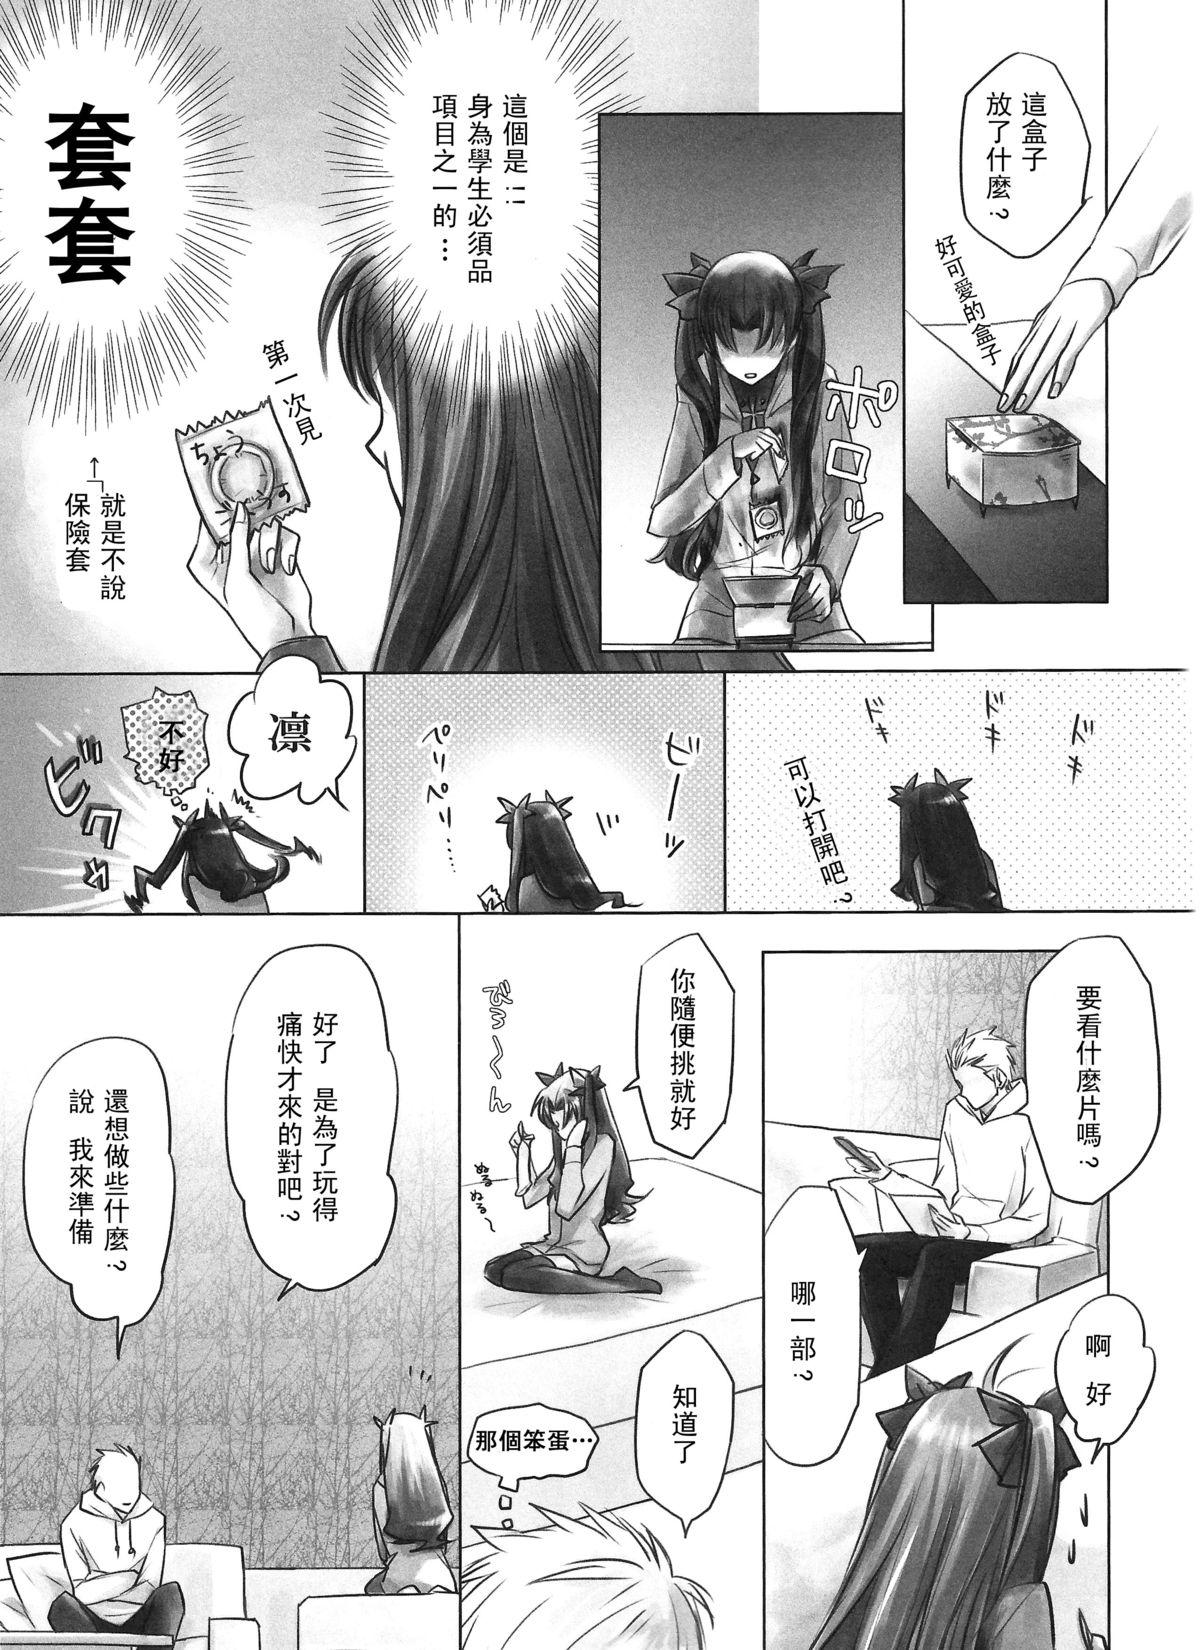 Live One/stay night - Fate stay night Spy Camera - Page 7